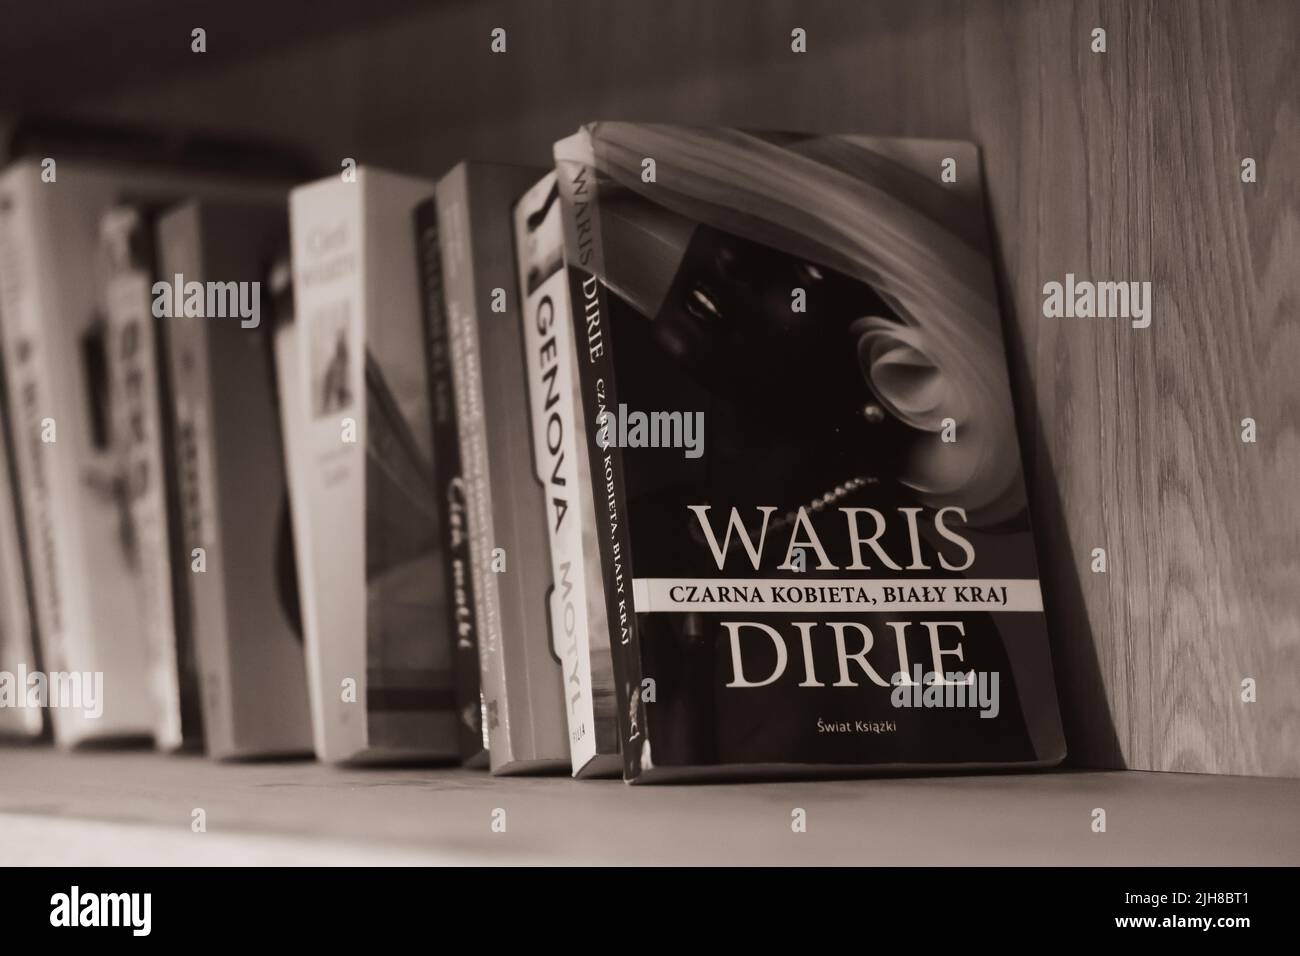 A Waris Dirie book standing on a wooden shelf in black and white Stock Photo